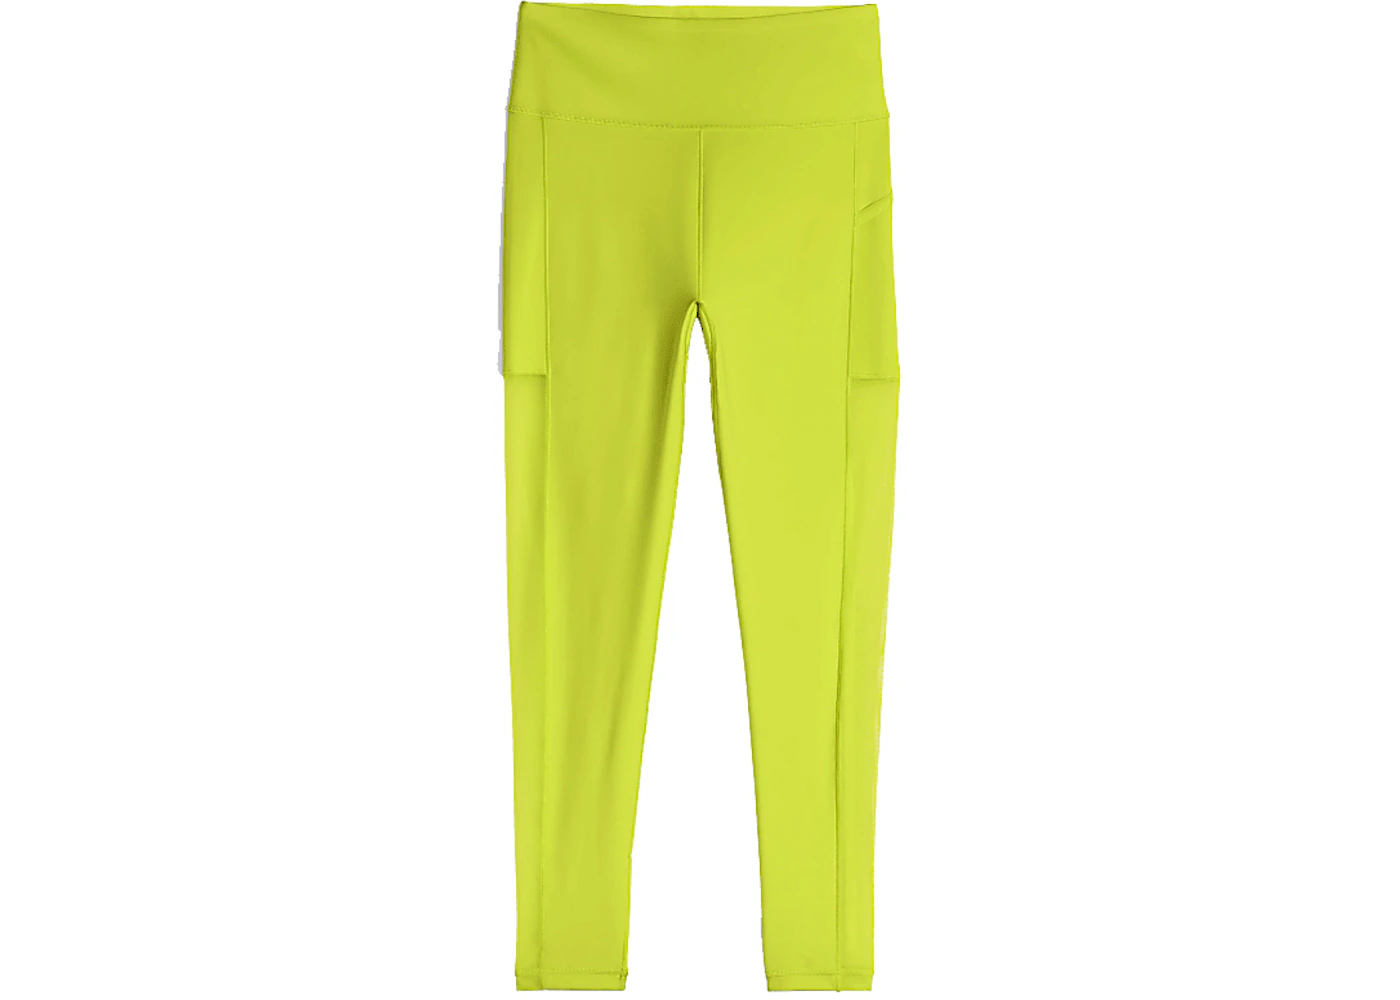 adidas Ivy Park x Peloton Power Tights Shock Lime/Focus Olive - FW21 - US